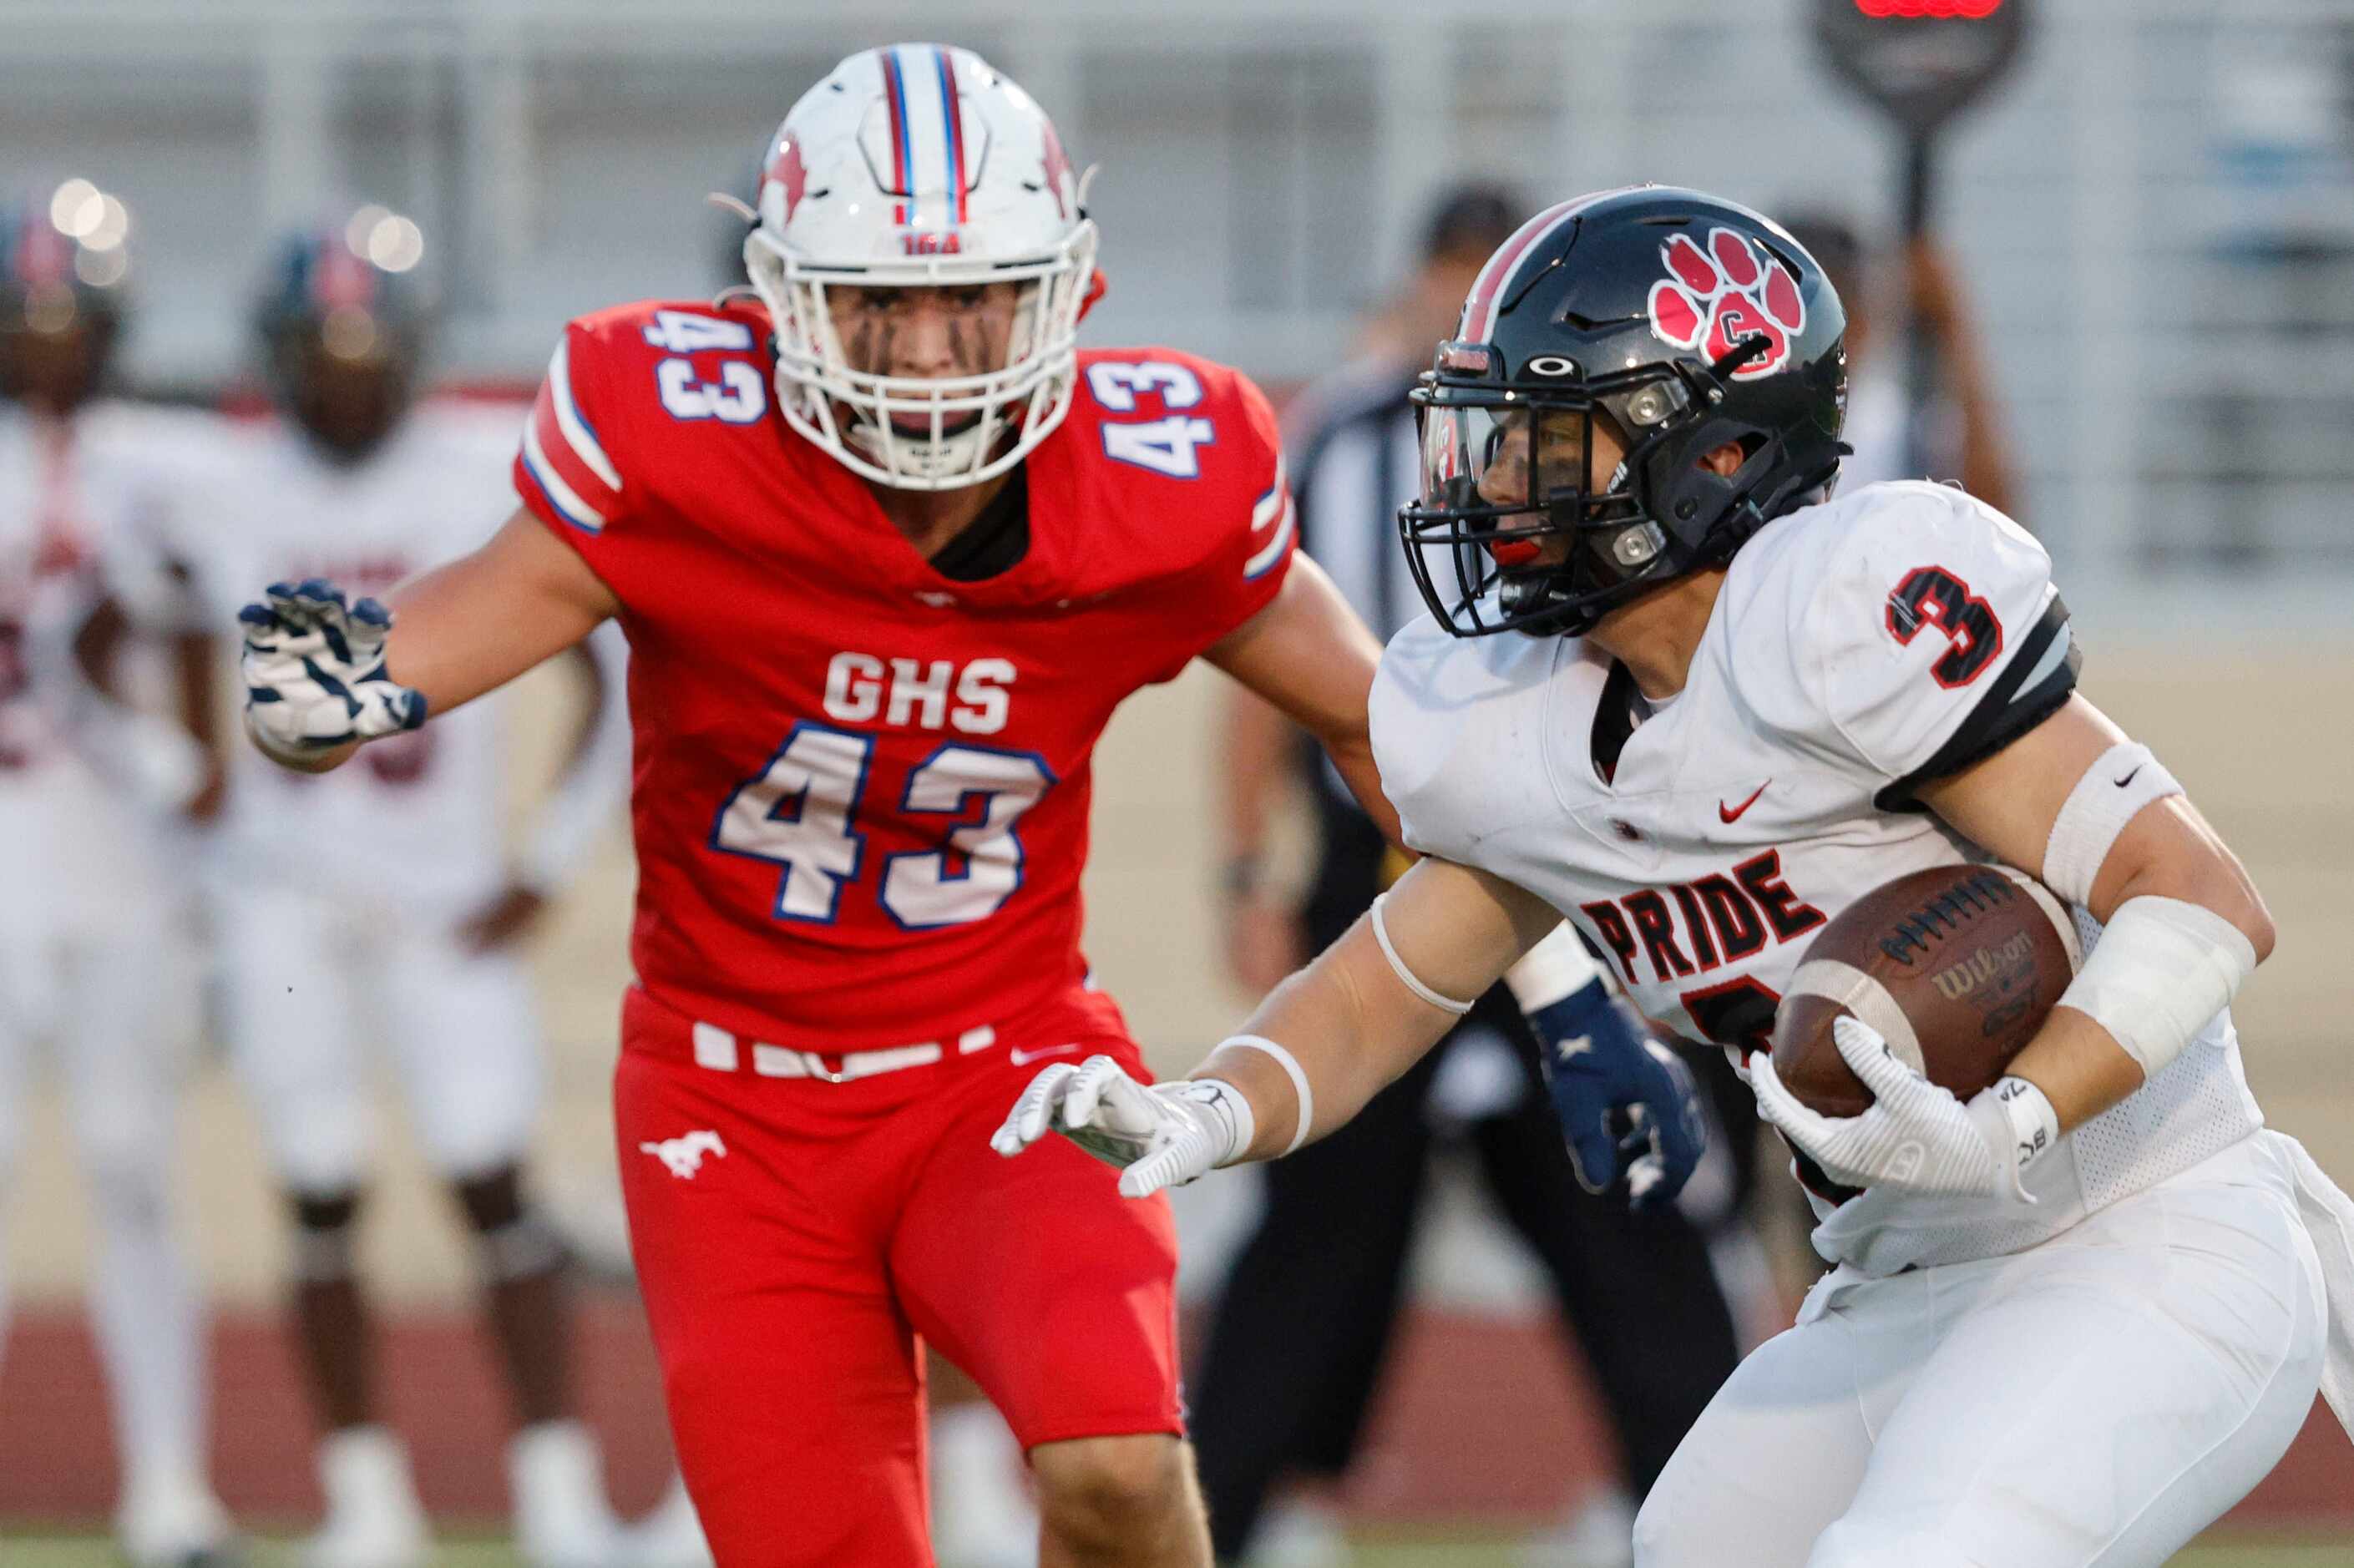 Colleyville Heritage's Ryan Keleher (3) carries the ball against Grapevine's Bradley Stanyer...